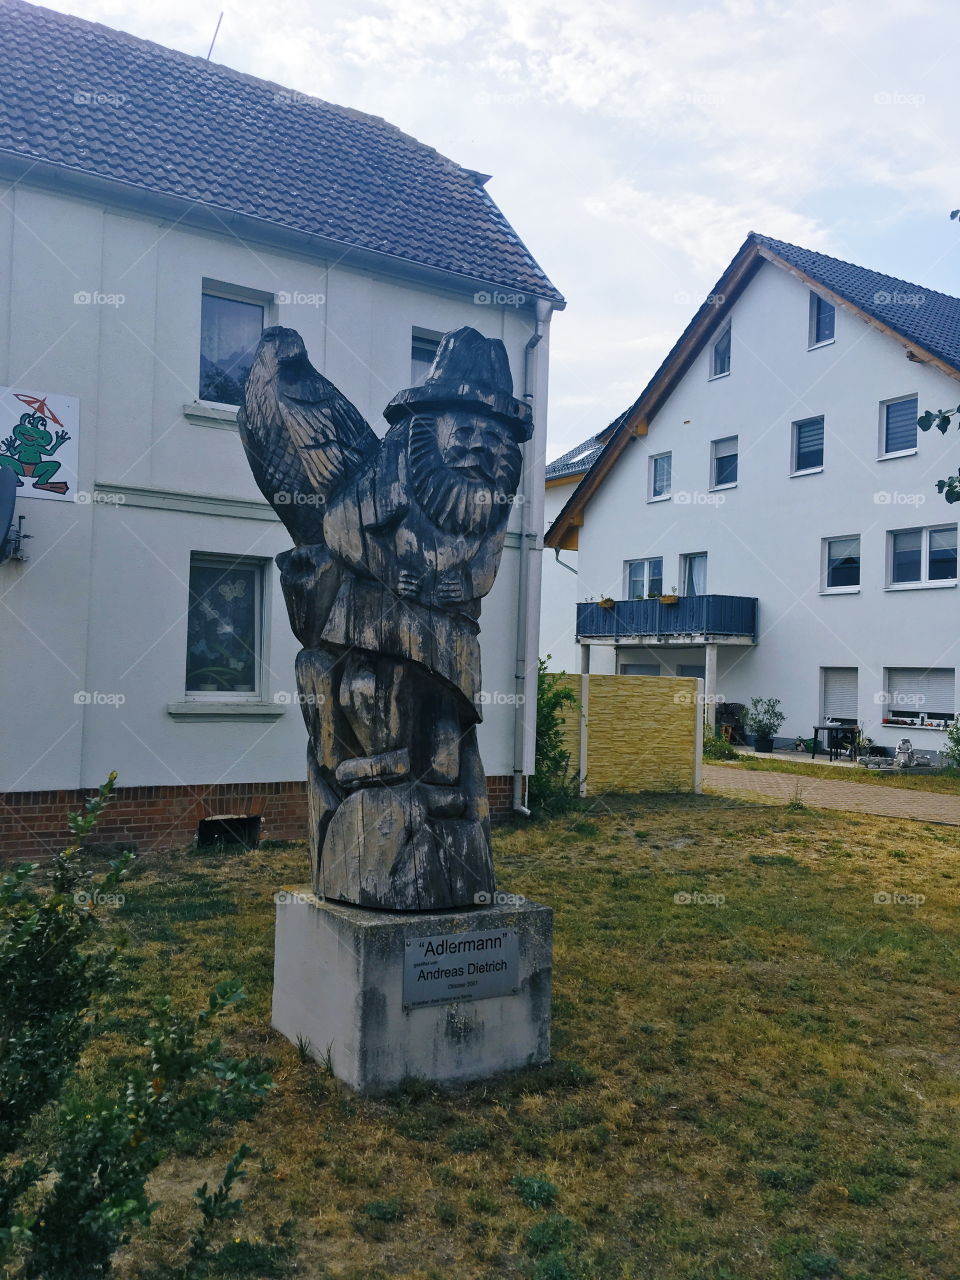 A statue of Eagle Man in Kemberg